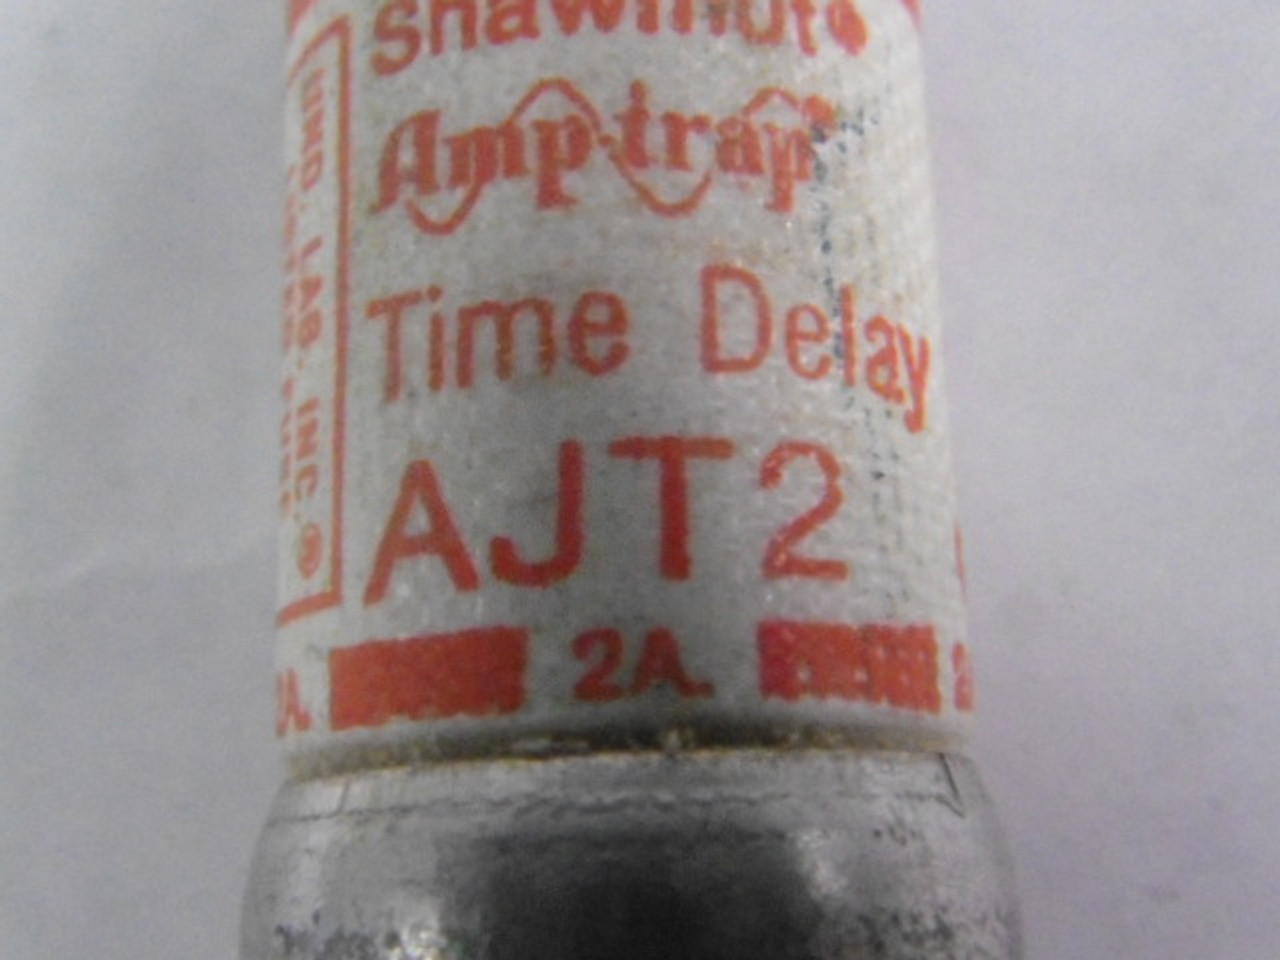 Gould Shawmut AJT2 Time Delay Fuse 2A 600V USED